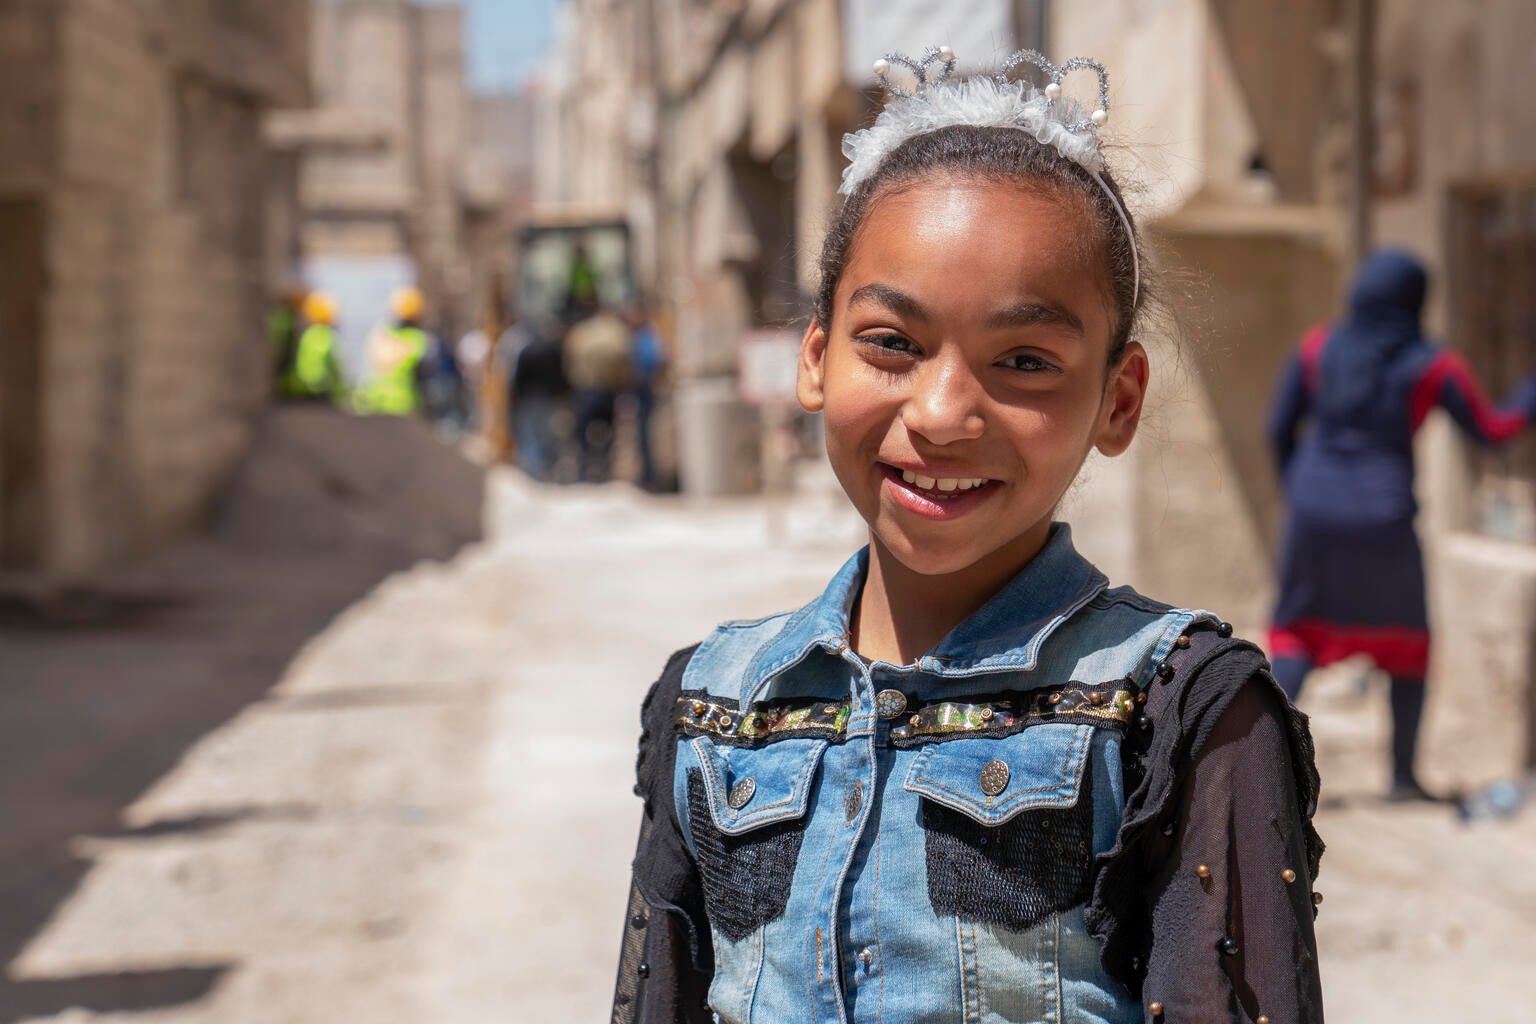 Salam, 10, in her neighborhood where a sewage rehabilitation project supported by UNICEF is underway in Shabaa, Rural Damascus, Syria